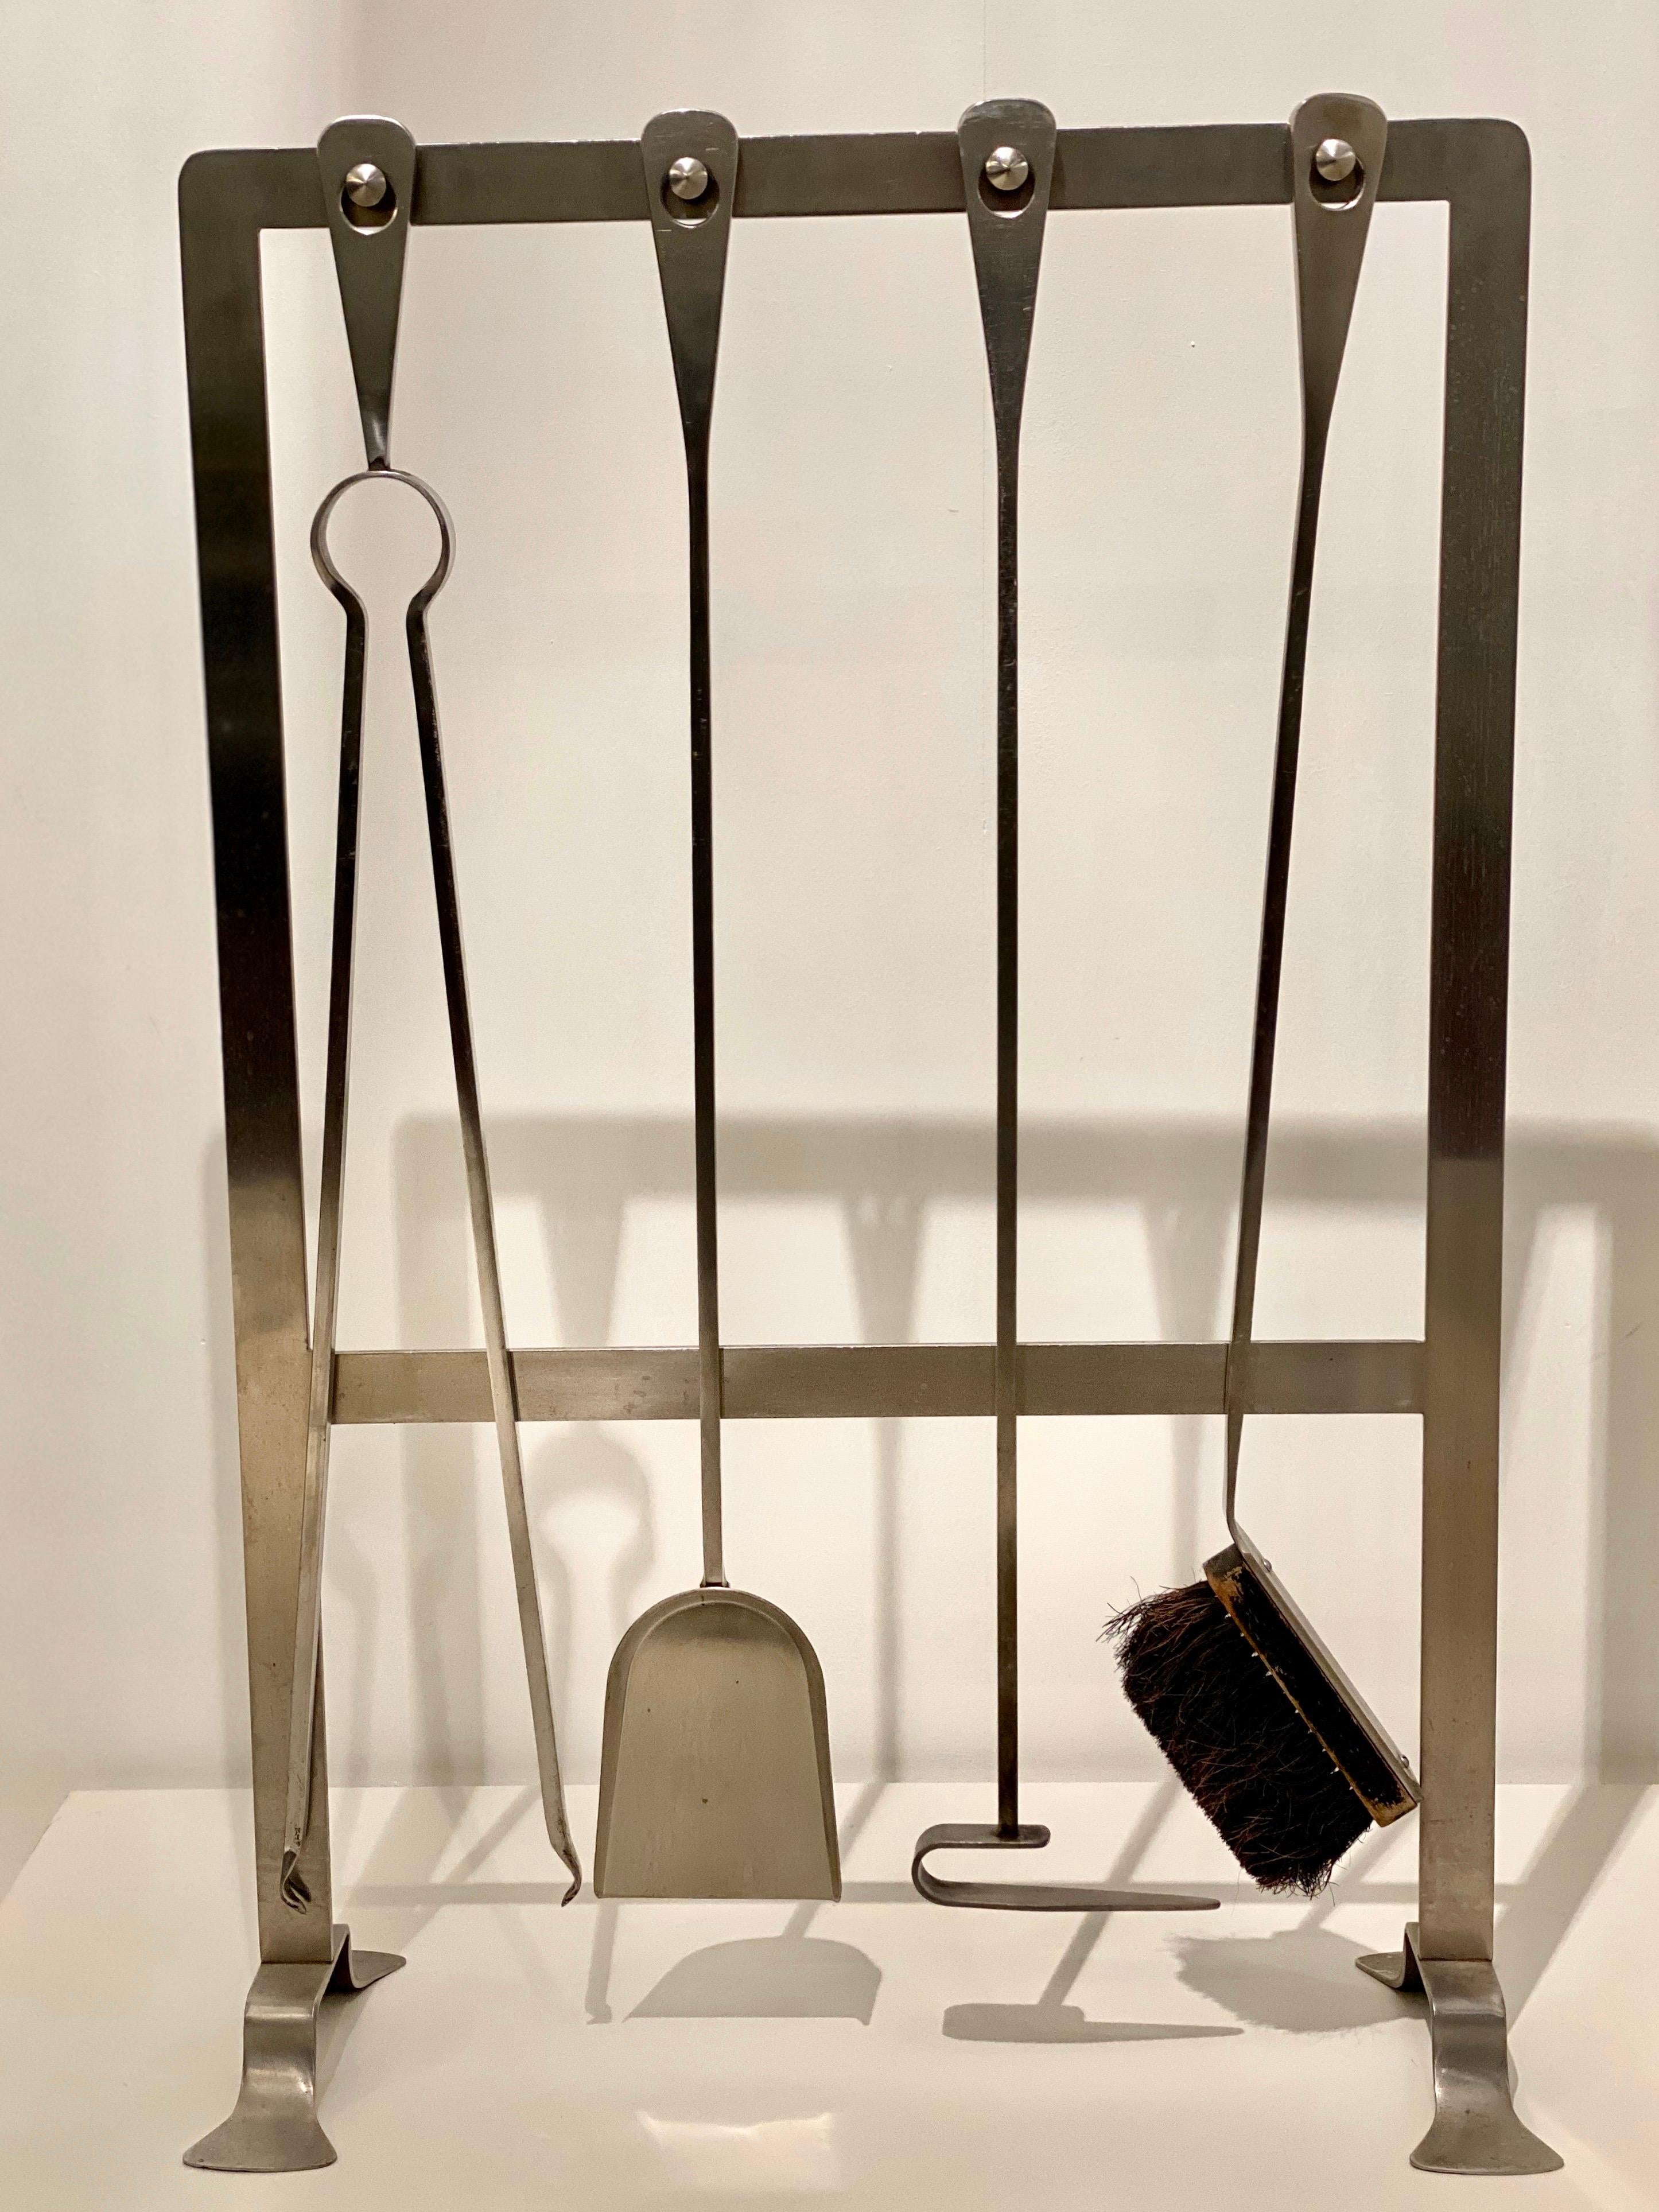 Sophisticated and elegant nickeled chrome fireplace tools, designed buy Jacques Charles in 1970s.
Chic, practical will add a touch of design to any fireplace (classic or modern).
 